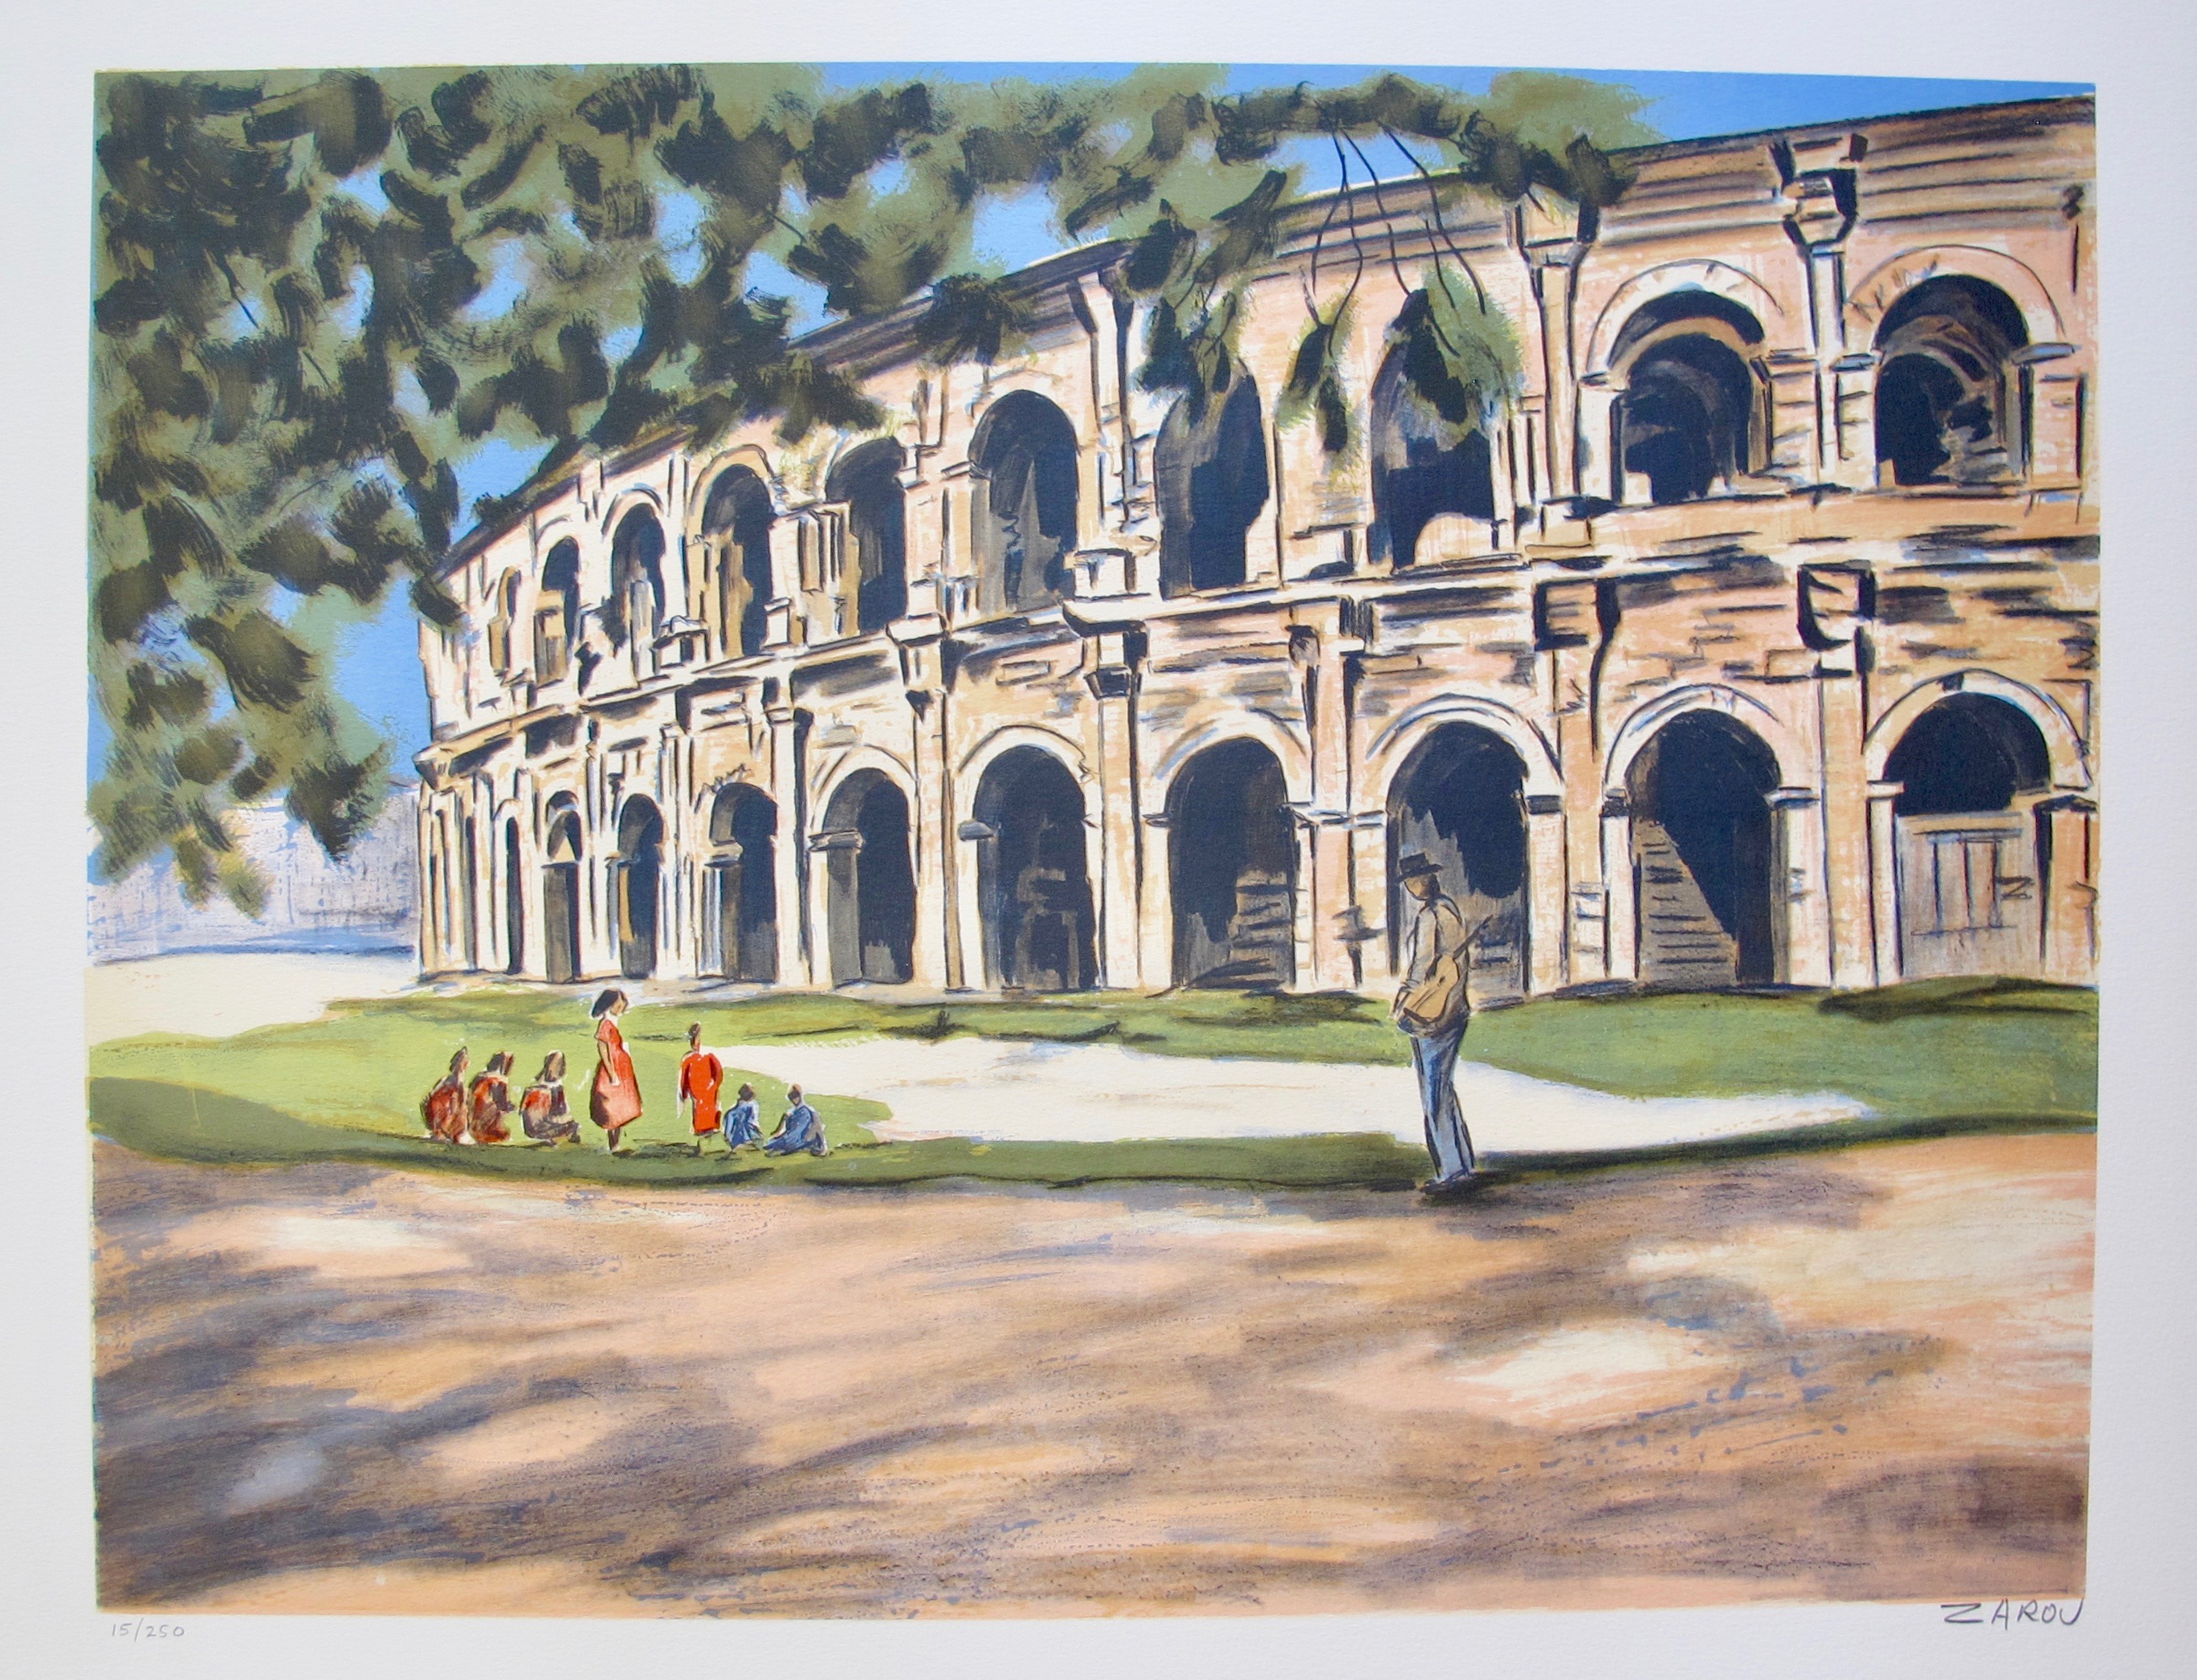 VICTOR ZAROU Colosseum Hand Signed Limited Edition Lithograph French Art